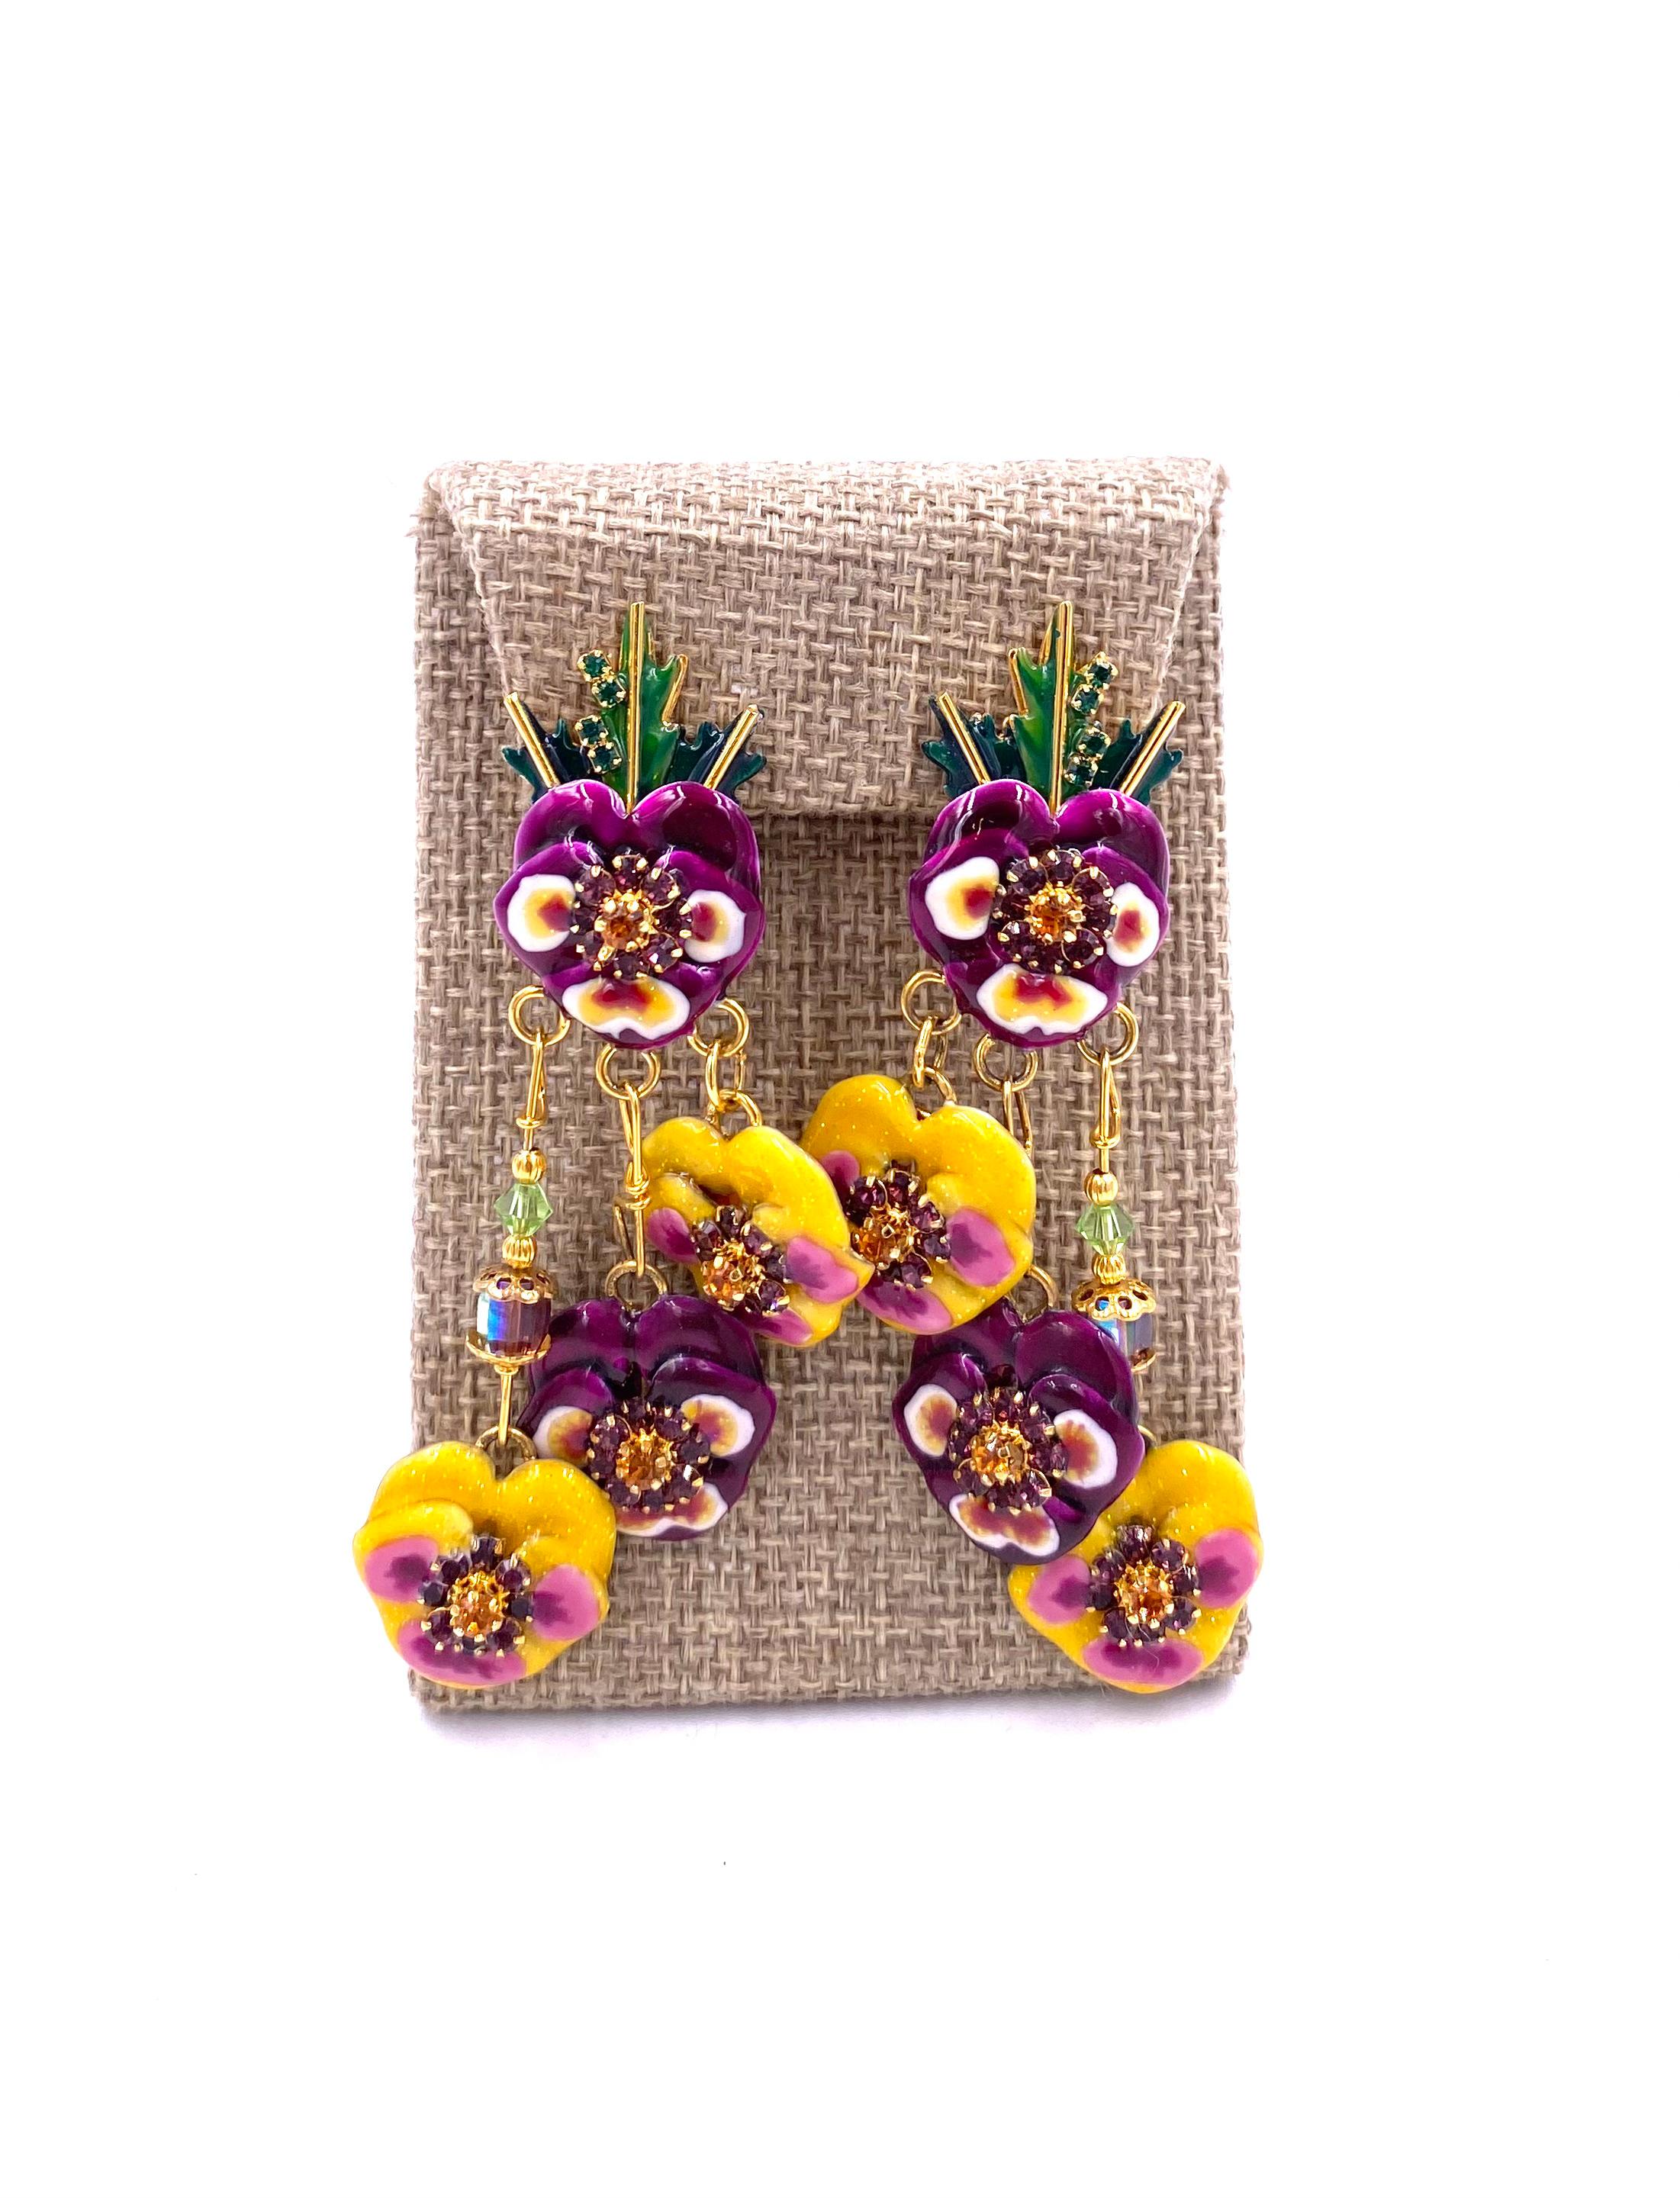 Indulge in the ultimate luxury with our Lunch at the Ritz Earrings in Bunch of Pansies. Adorned with vibrant yellow, magenta, green, and violet flower detailing and sparkling rhinestones, these earrings will add a touch of sophistication and glamour